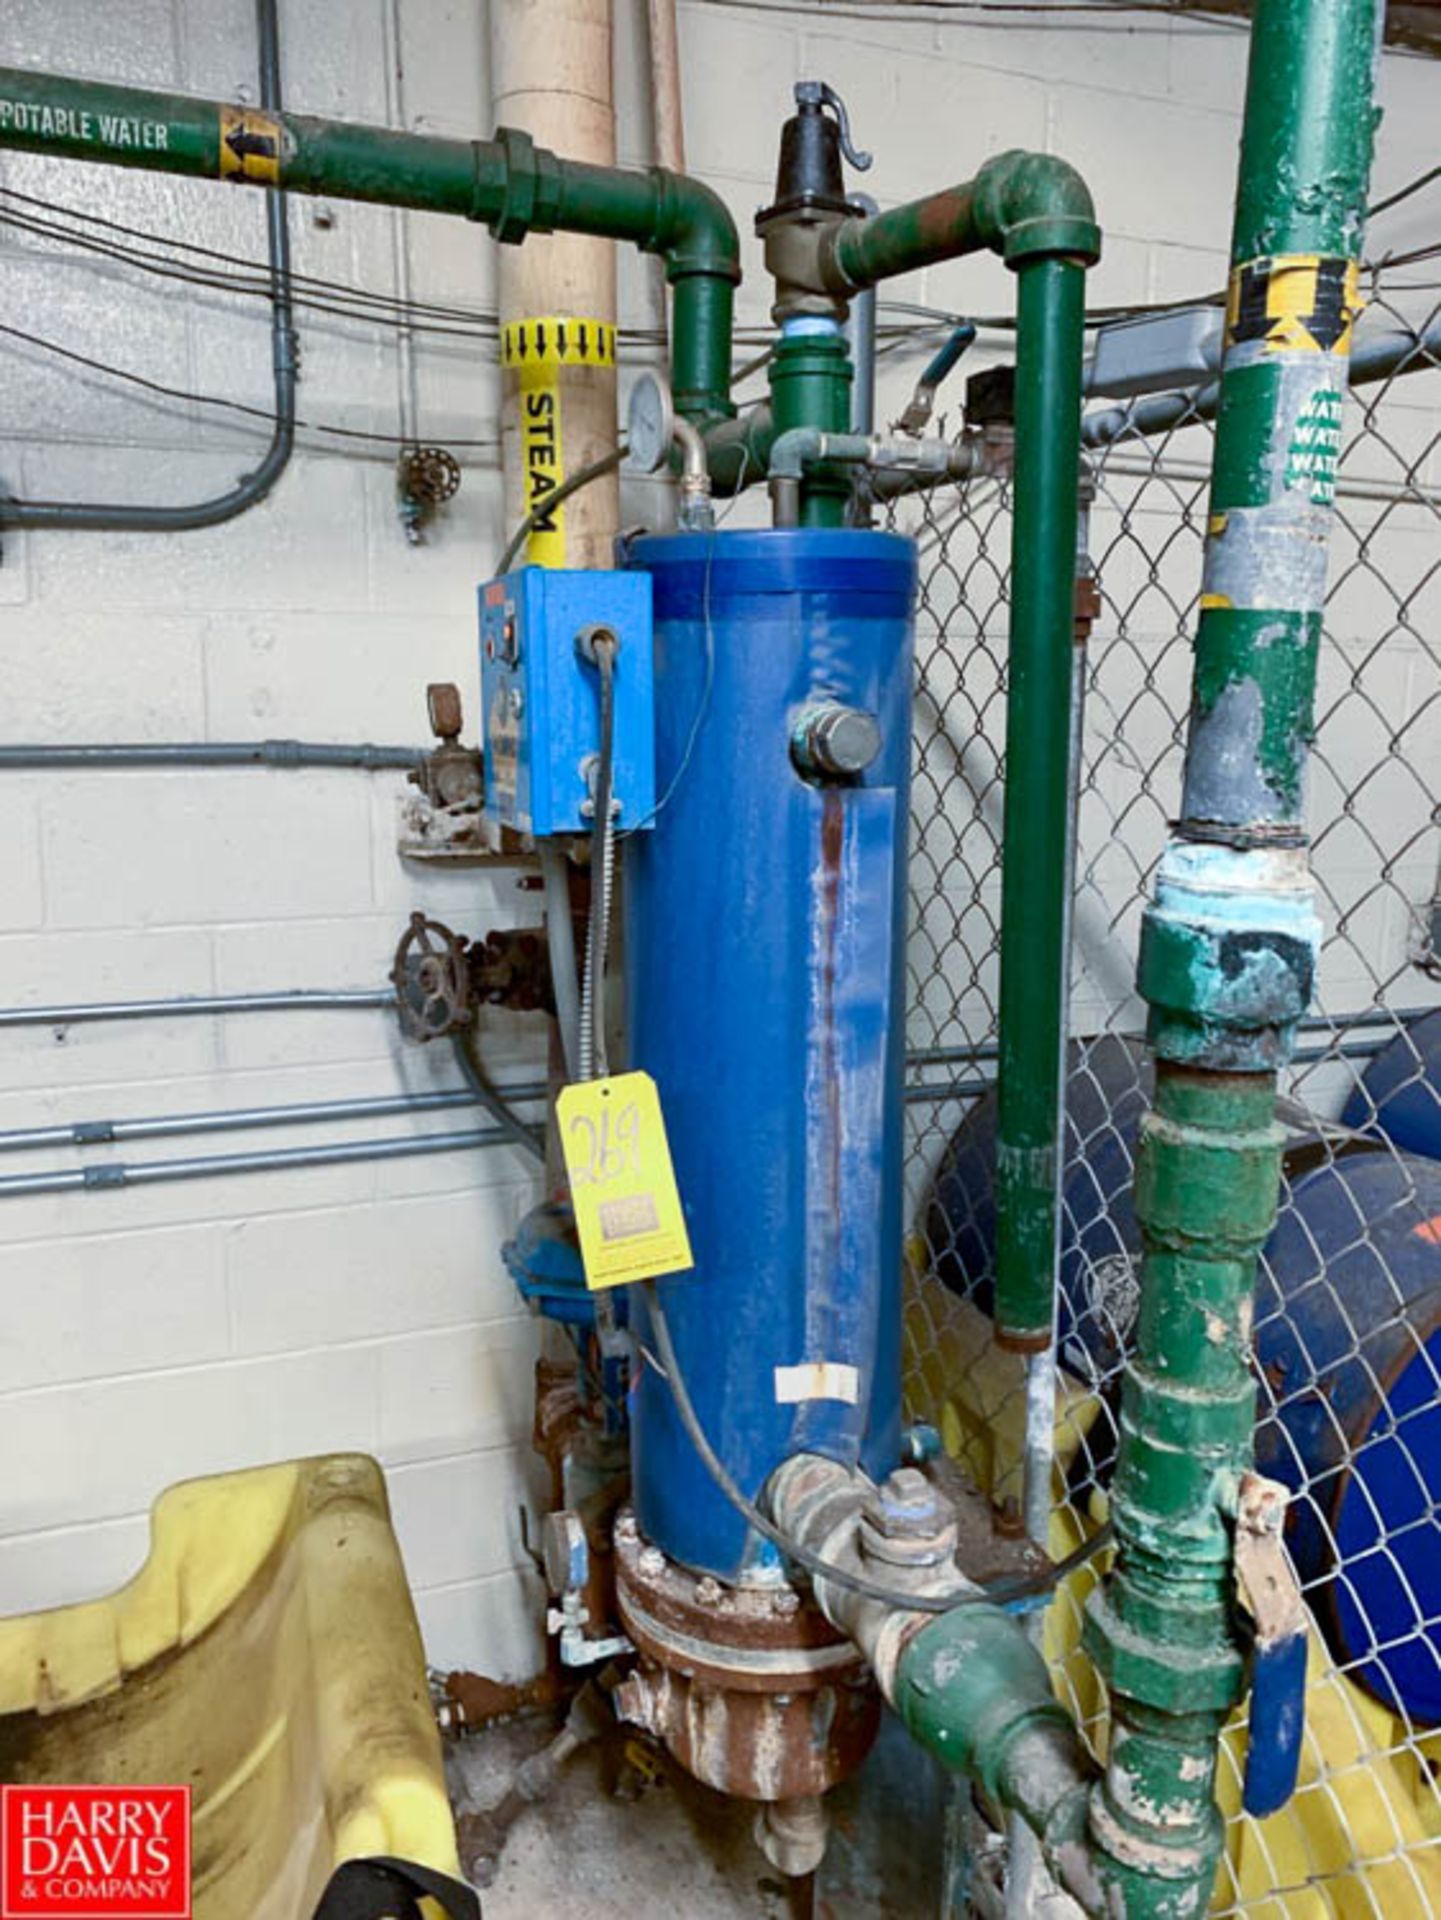 P-K Compact Water Heater Rigging Fee: $150